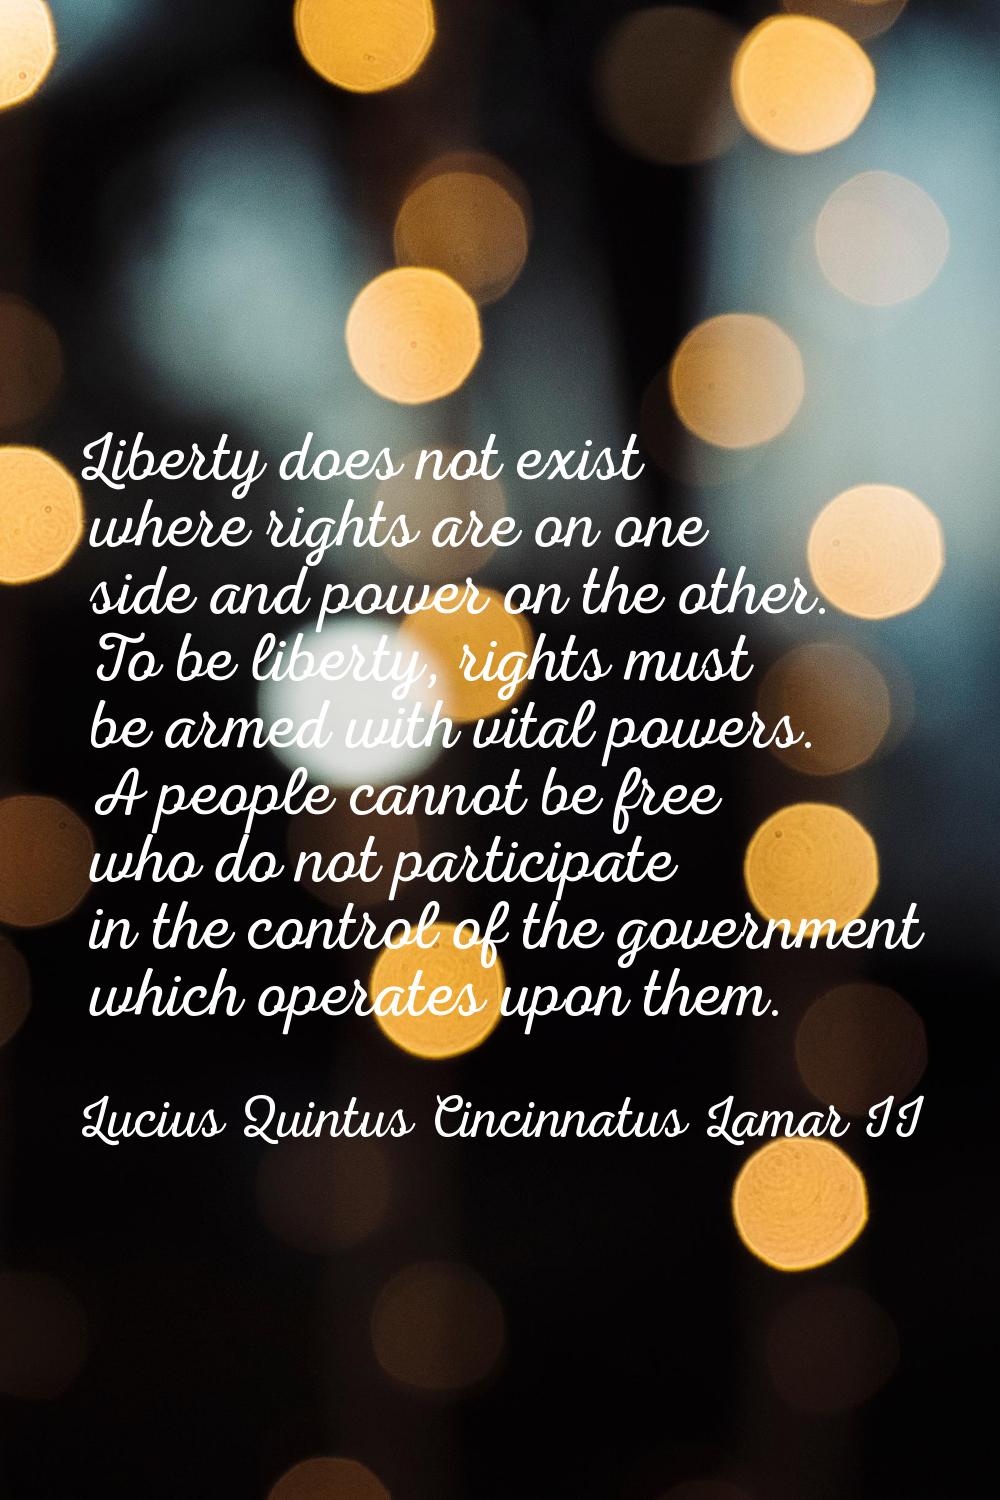 Liberty does not exist where rights are on one side and power on the other. To be liberty, rights m